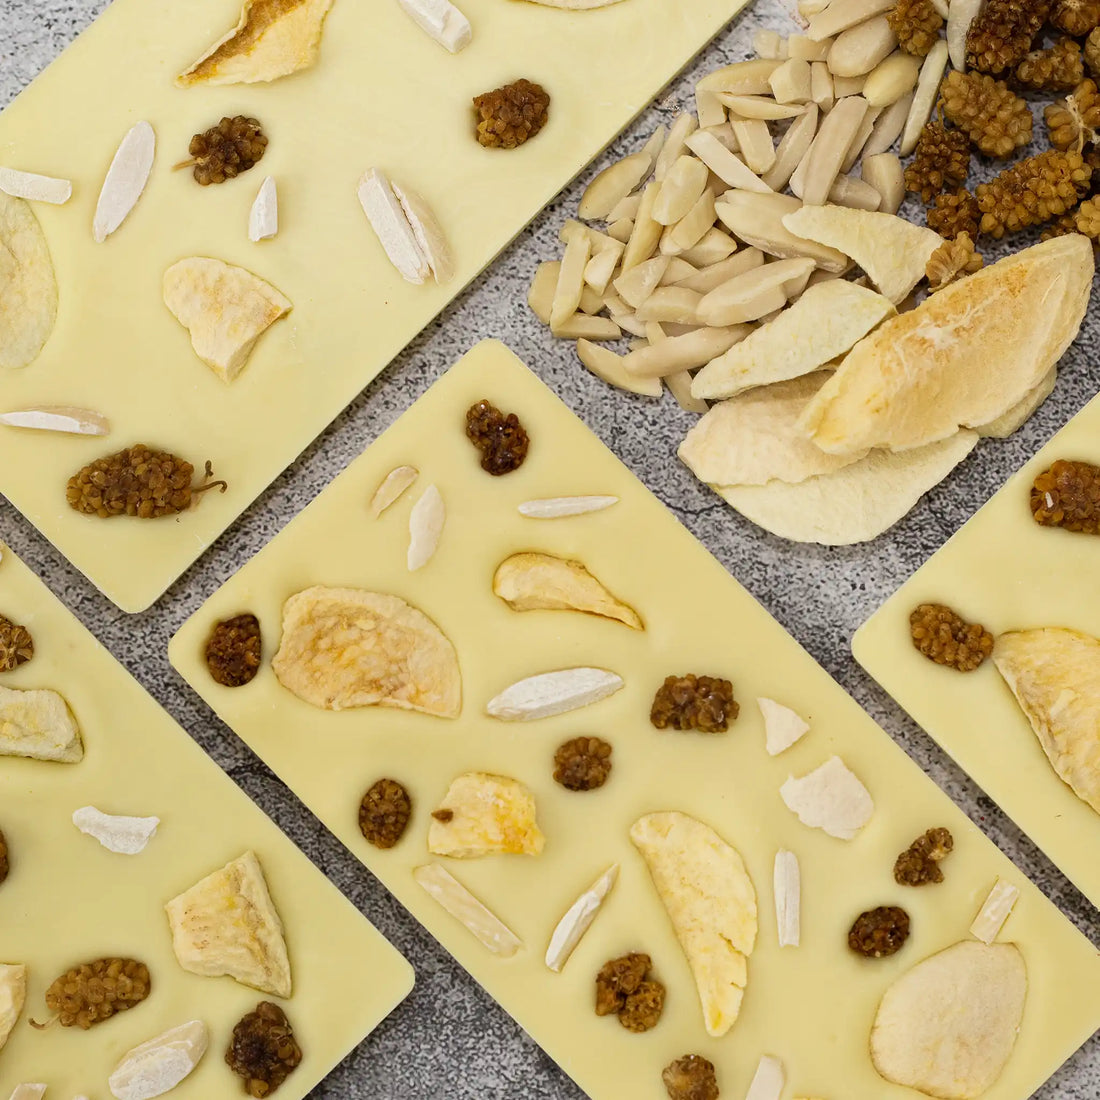 Delectable Peach - Front and Back of Sugar Free White Chocolate Bar with Peaches, Mulberries, and Almonds